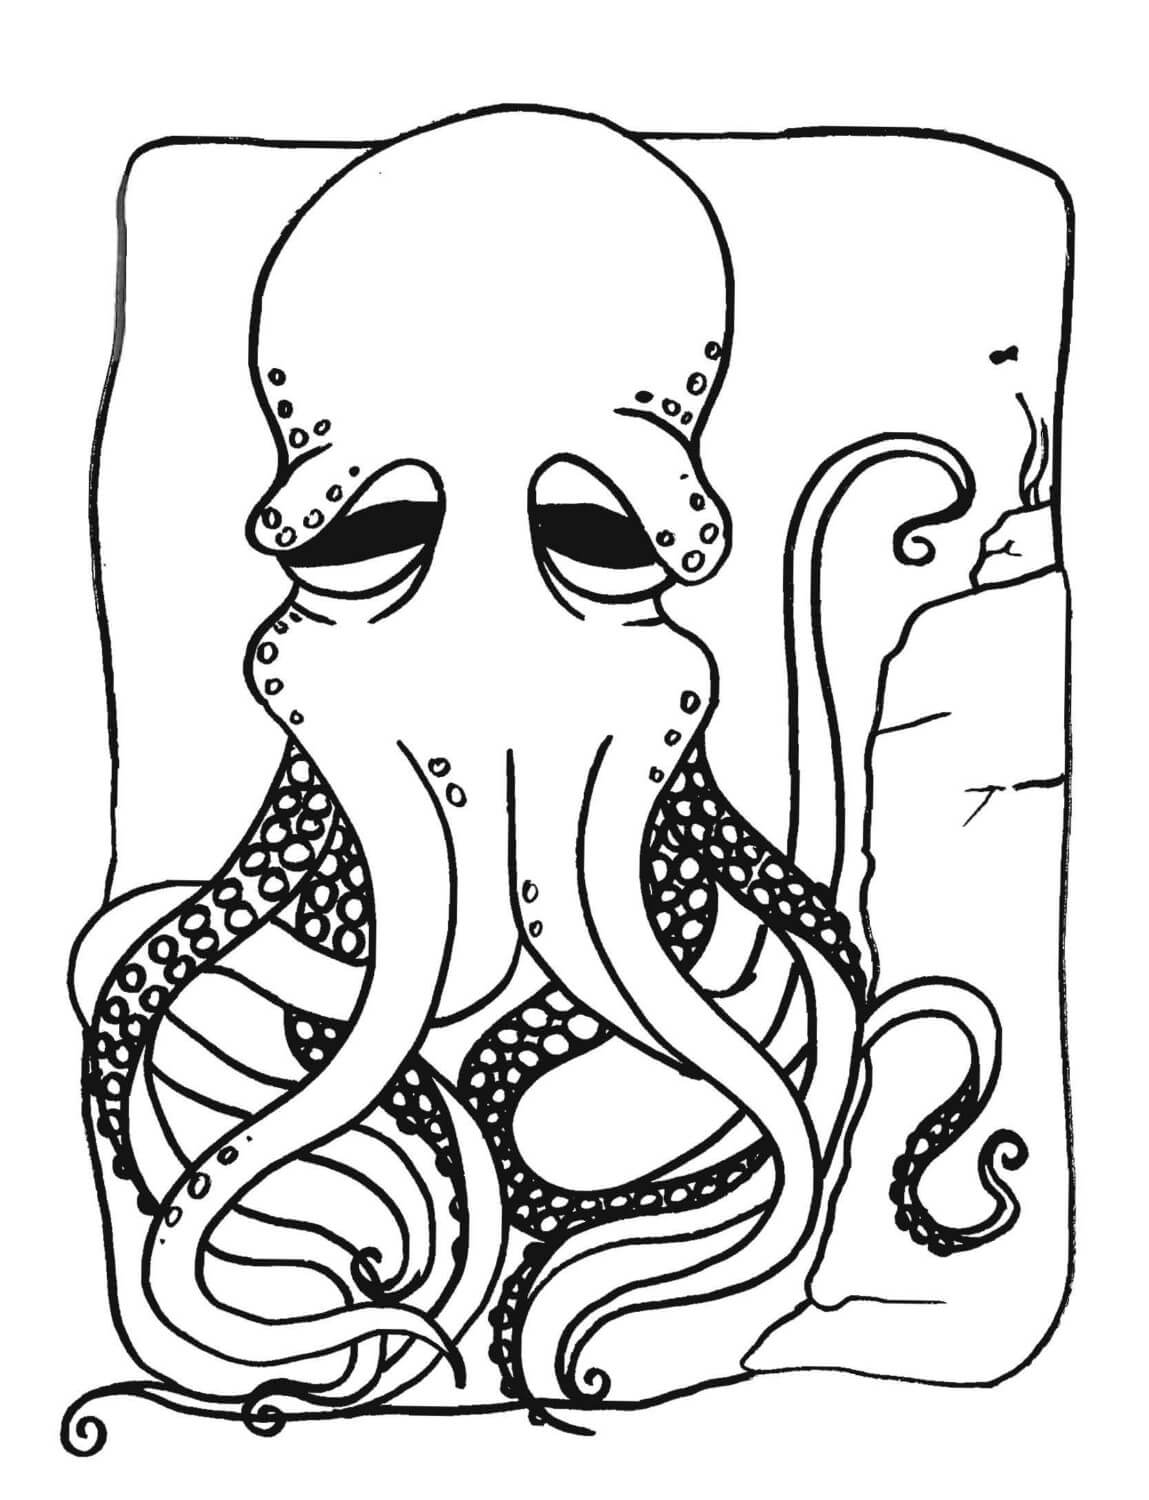 Printable Octopus coloring page - Download, Print or Color Online for Free